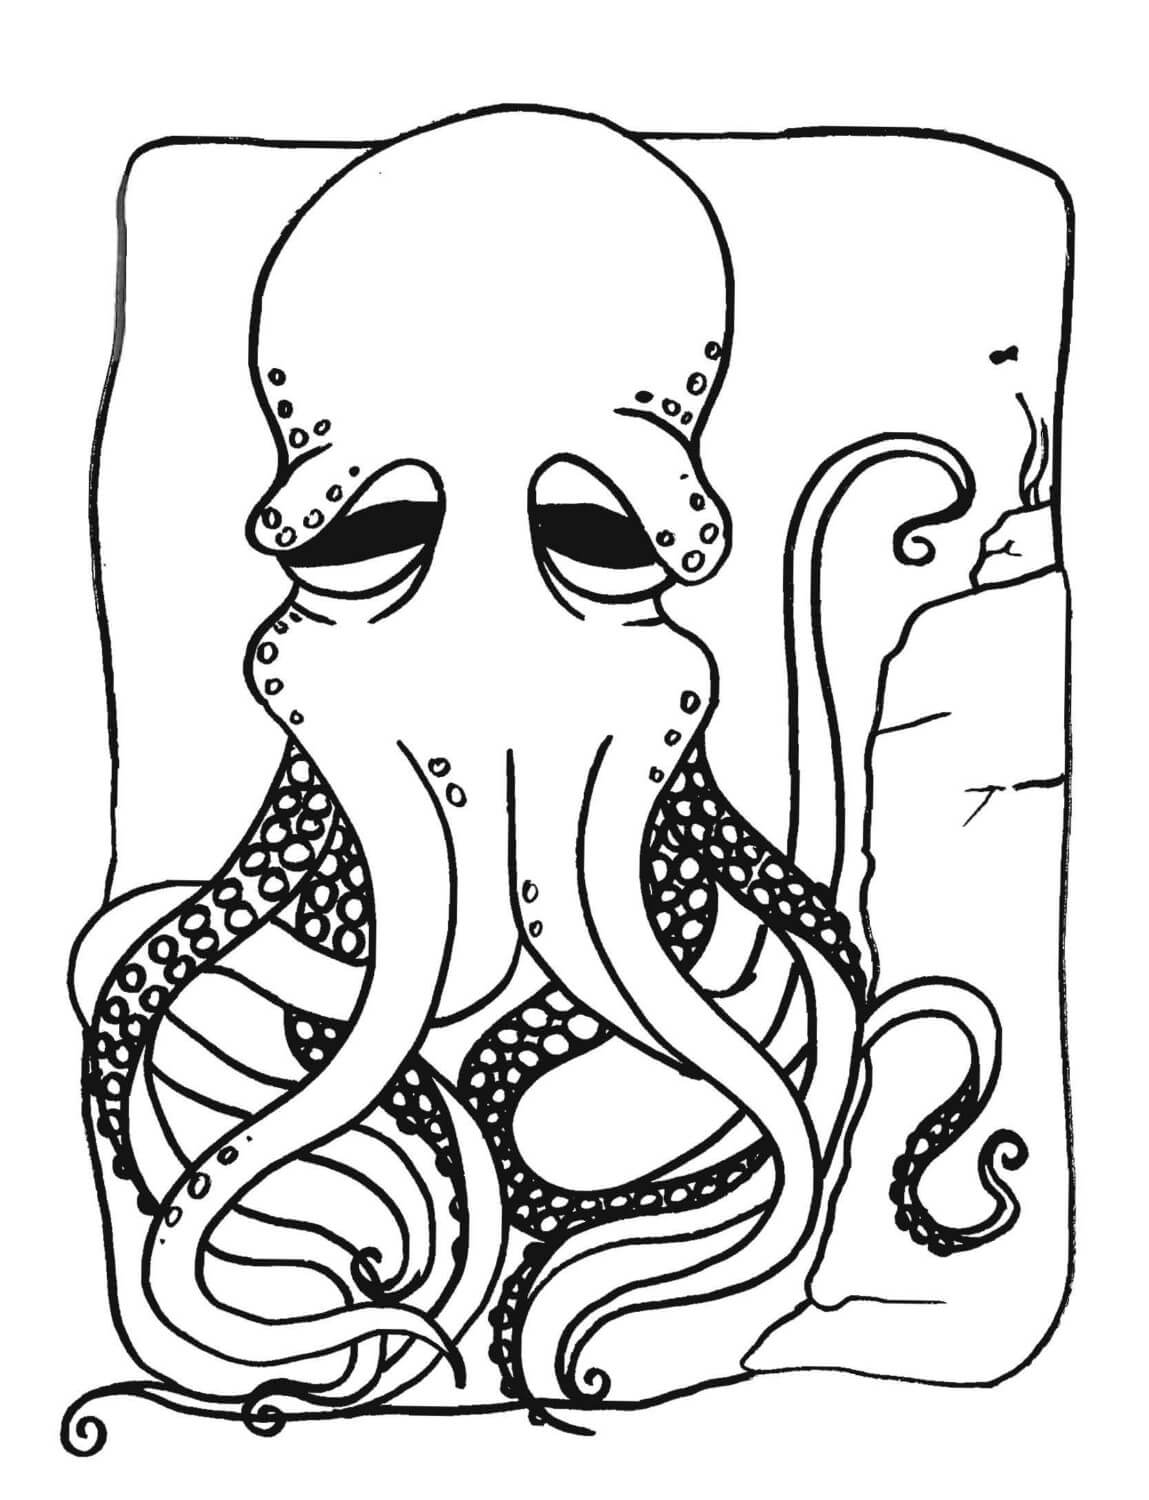 Printable Octopus coloring page - Download, Print or Color Online for Free